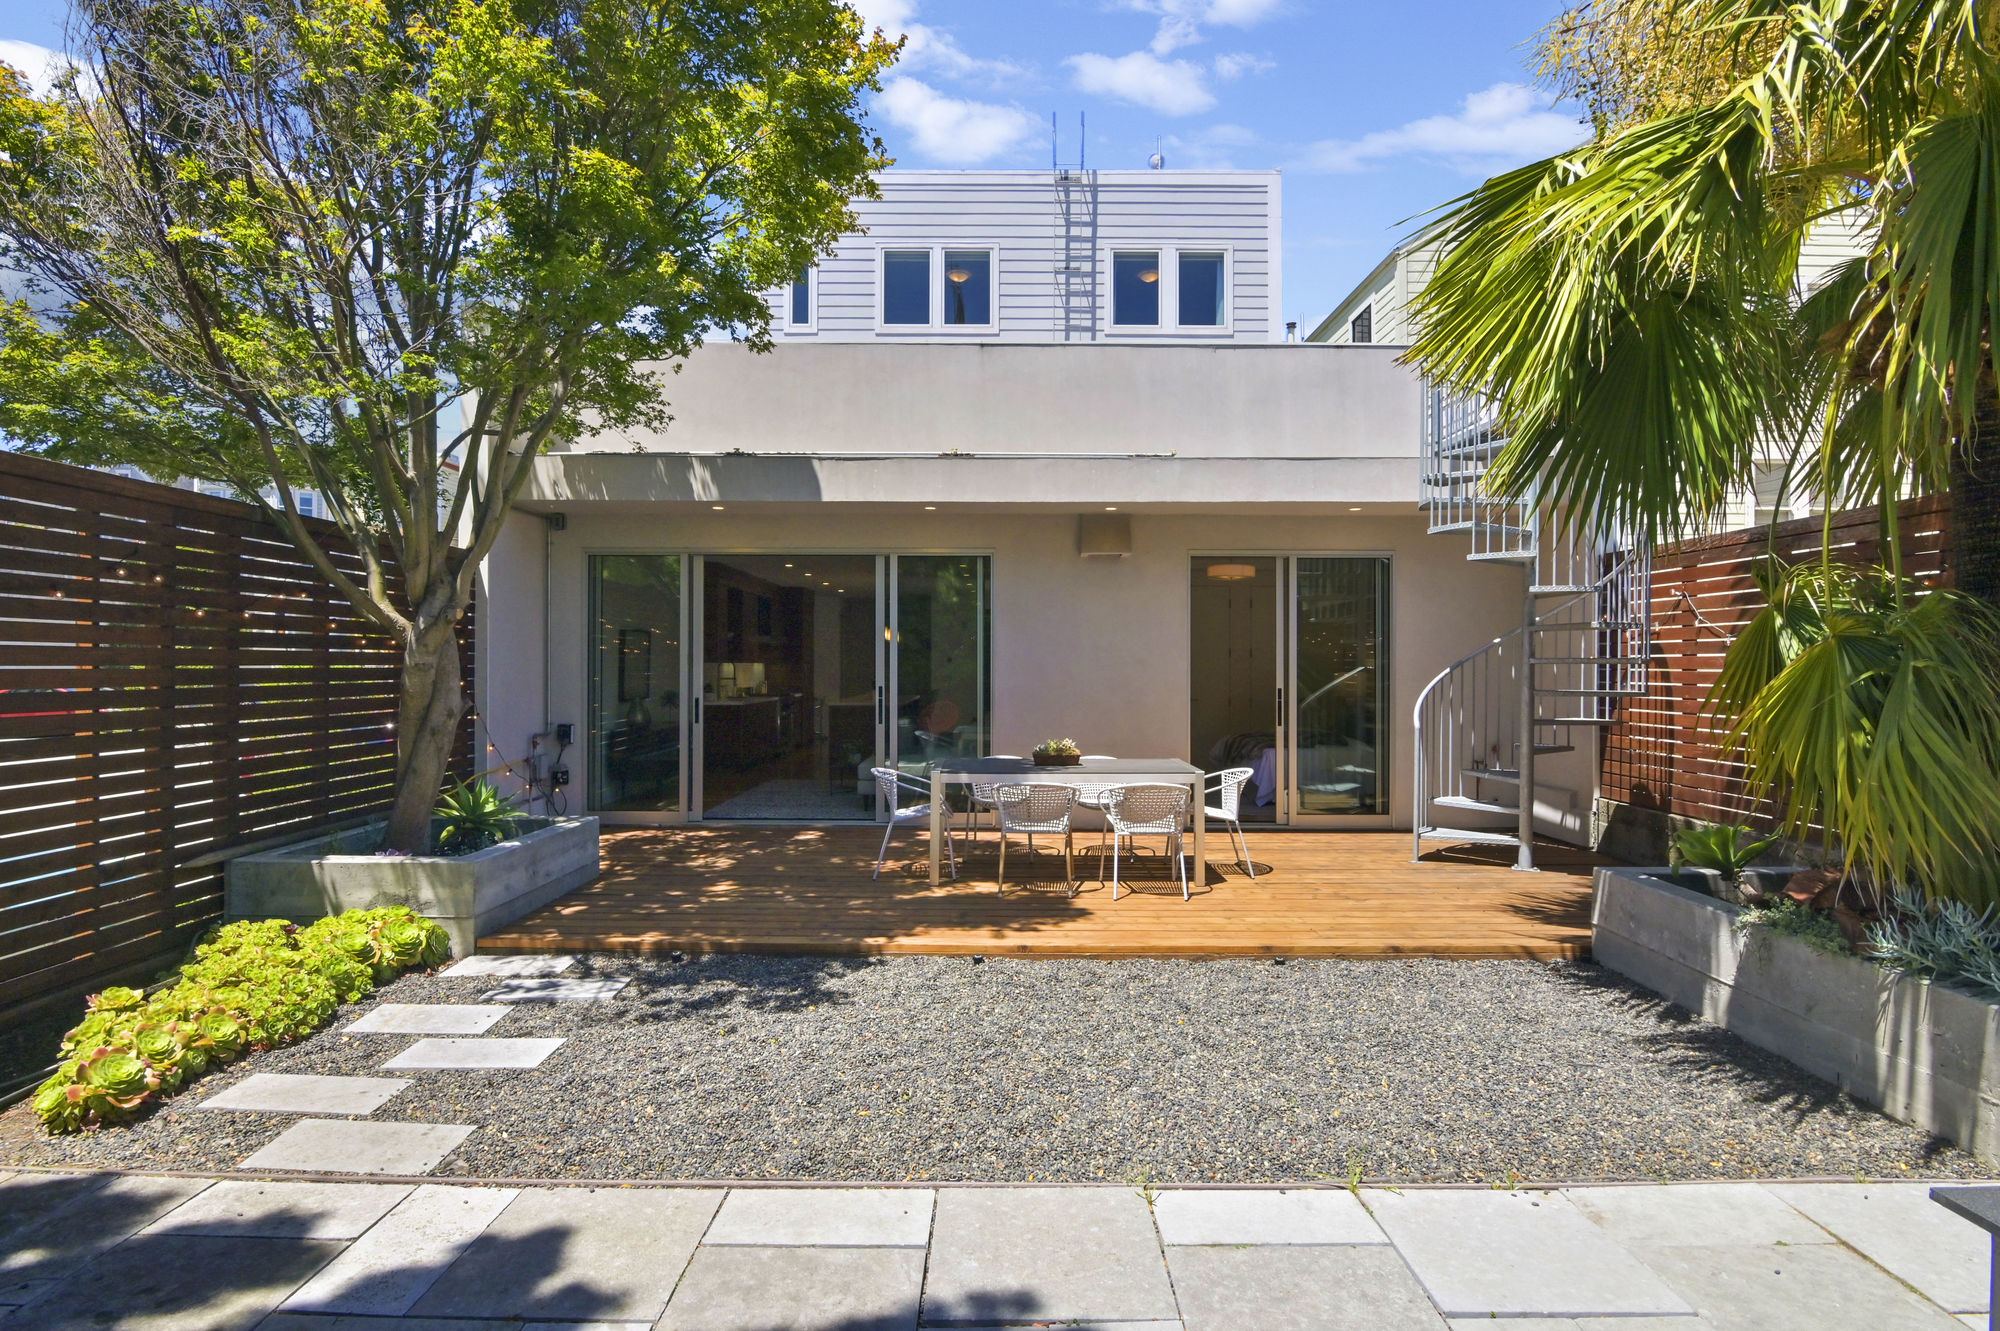 Property Photo: Rear exterior view of the ground-level outdoor space, showing an outdoor living area and palm trees